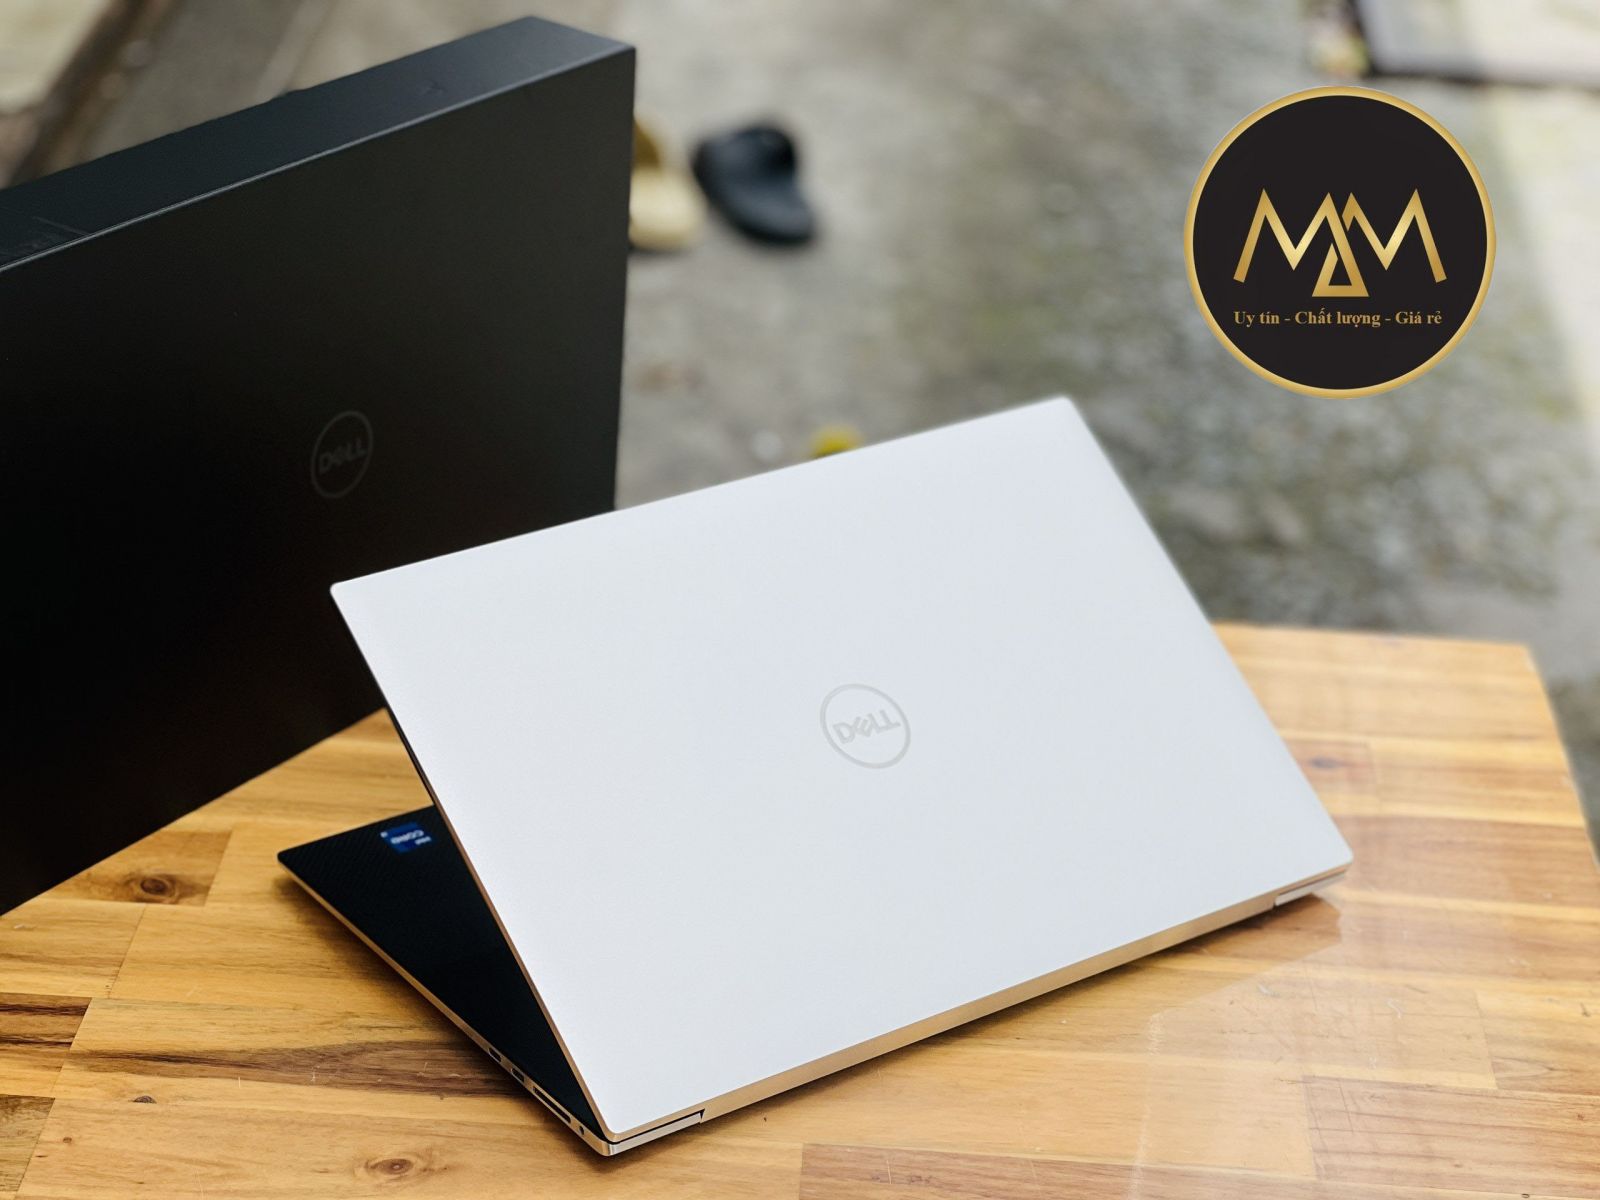 DELL XPS 15 GIÁ RẺ